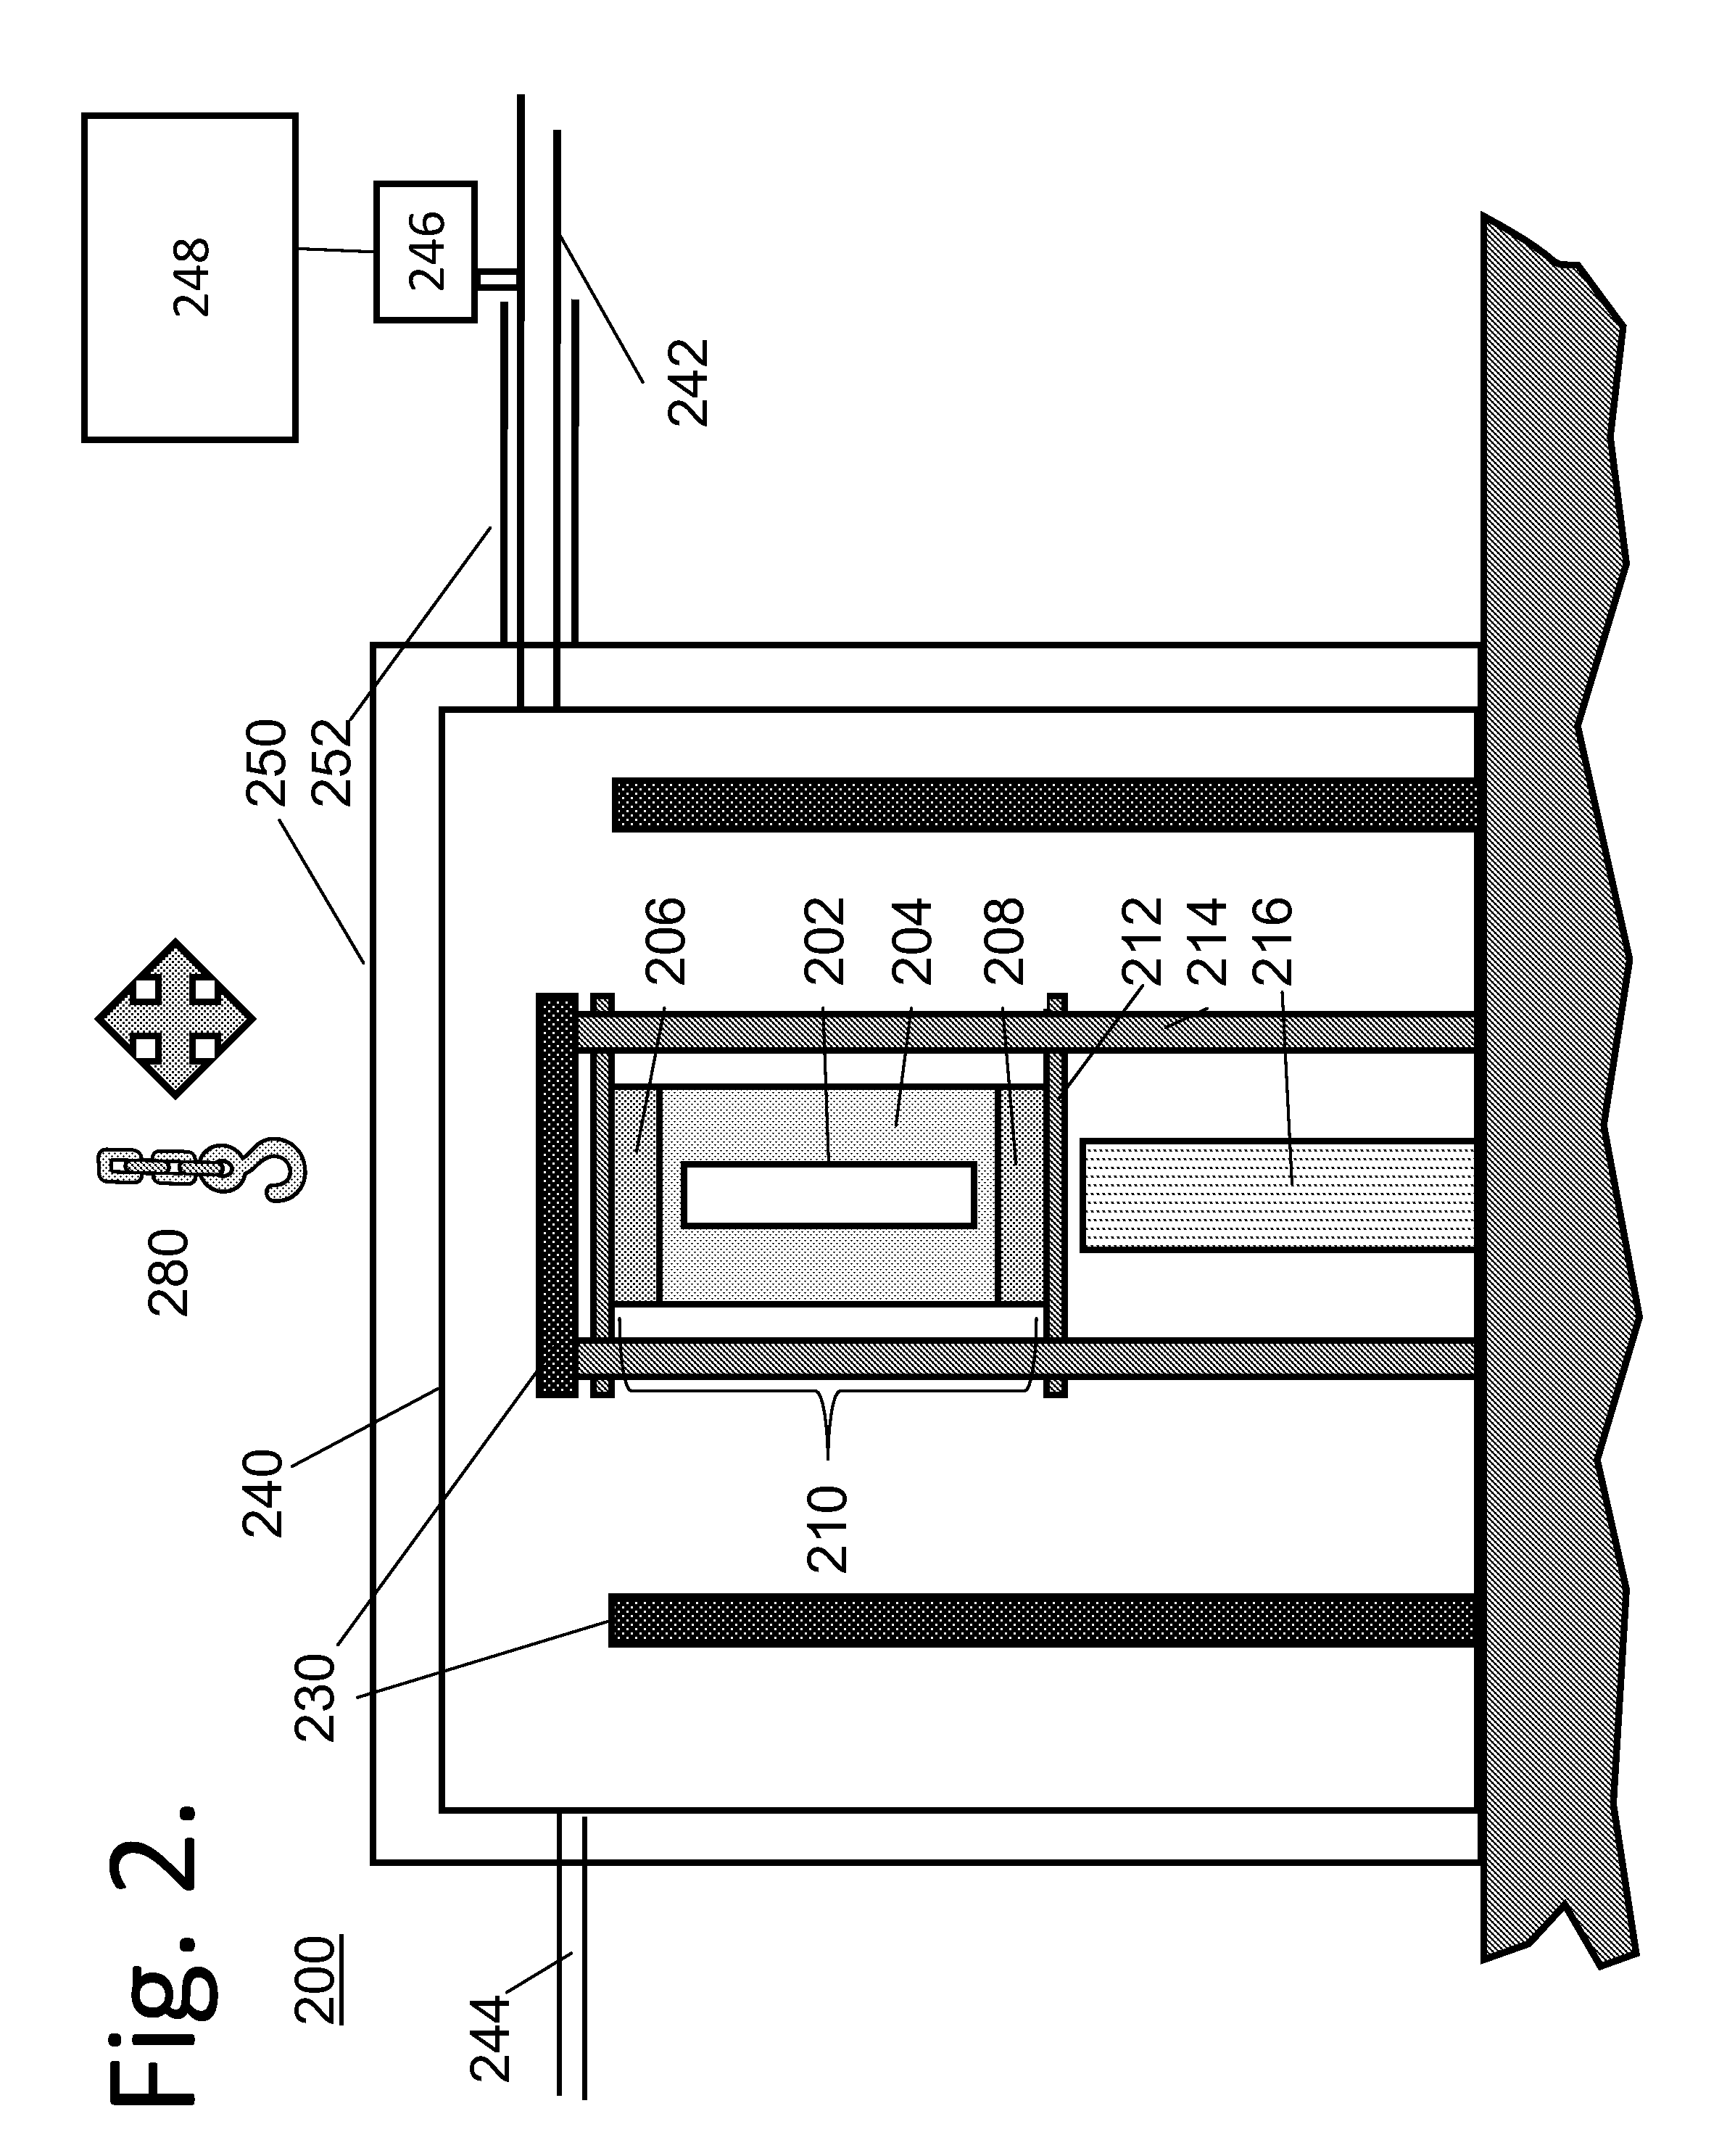 Plant and method for large-scale ammonothermal manufacturing of gallium nitride boules